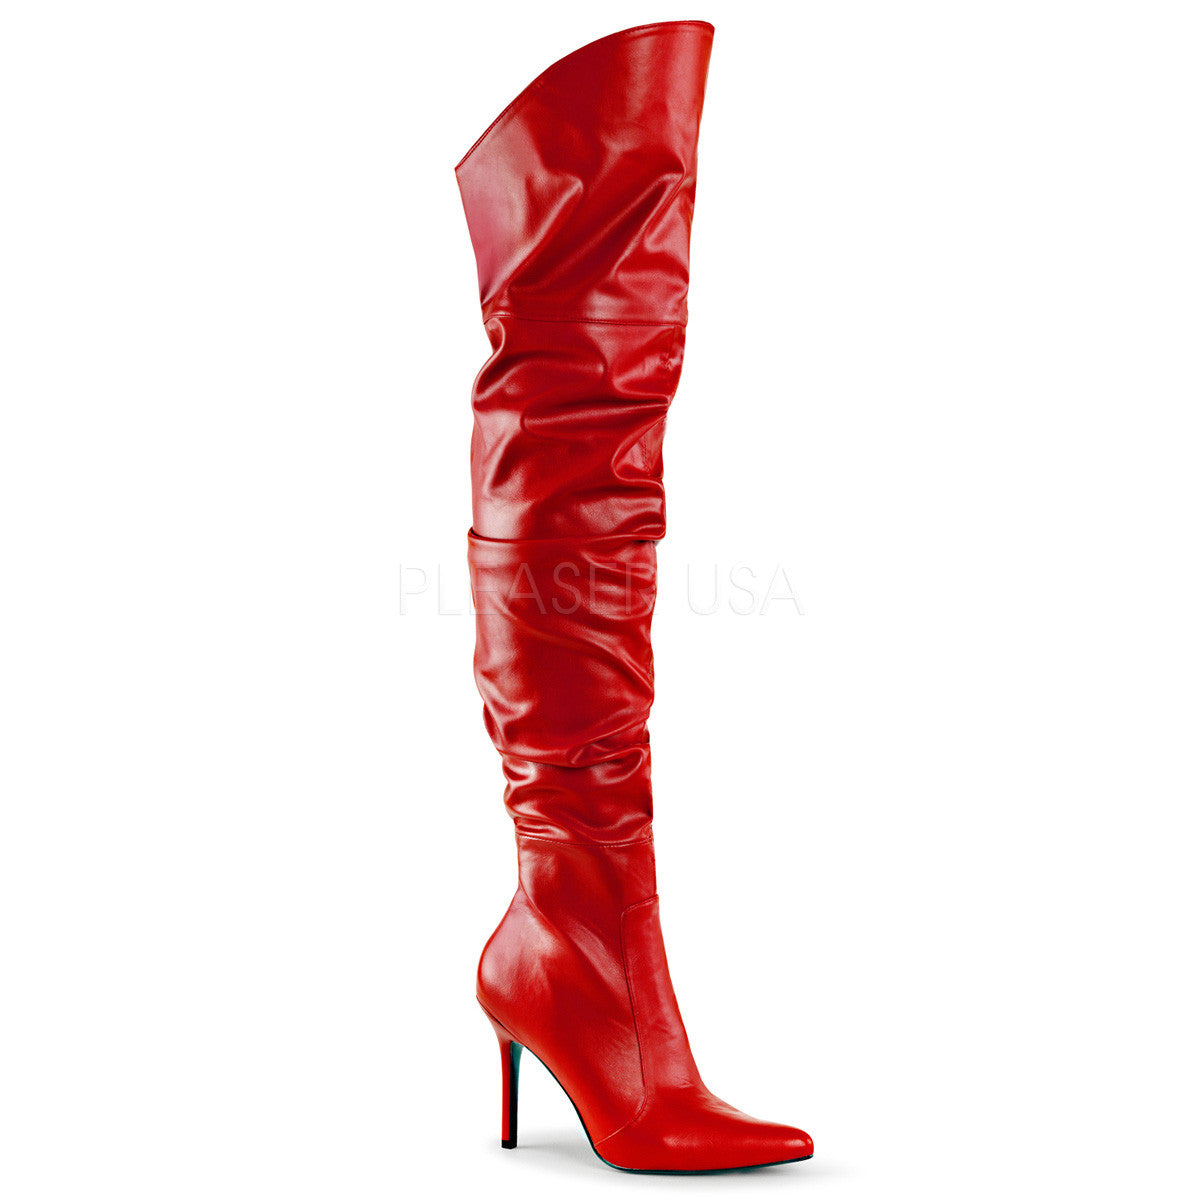 Pleaser CLASSIQUE-3011 Red Faux Leather Thigh High Boots - Shoecup.com